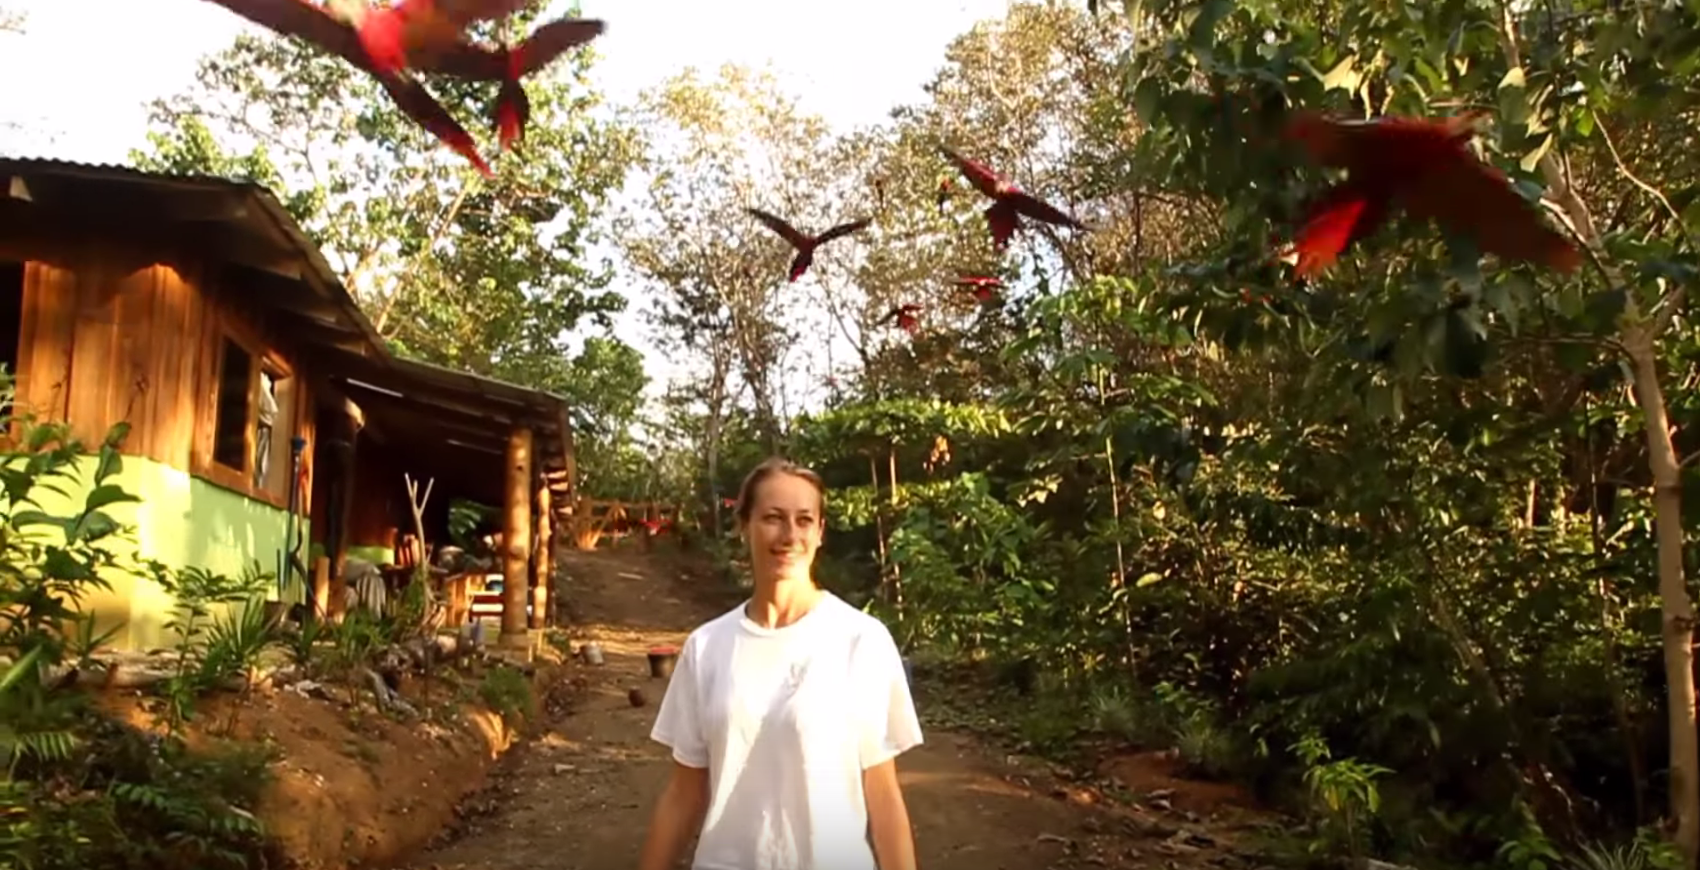 Screenshot from: "Scarlet Macaws -- Costa Rica" by: Charlie Fayers -- for: Hatched to Fly Free